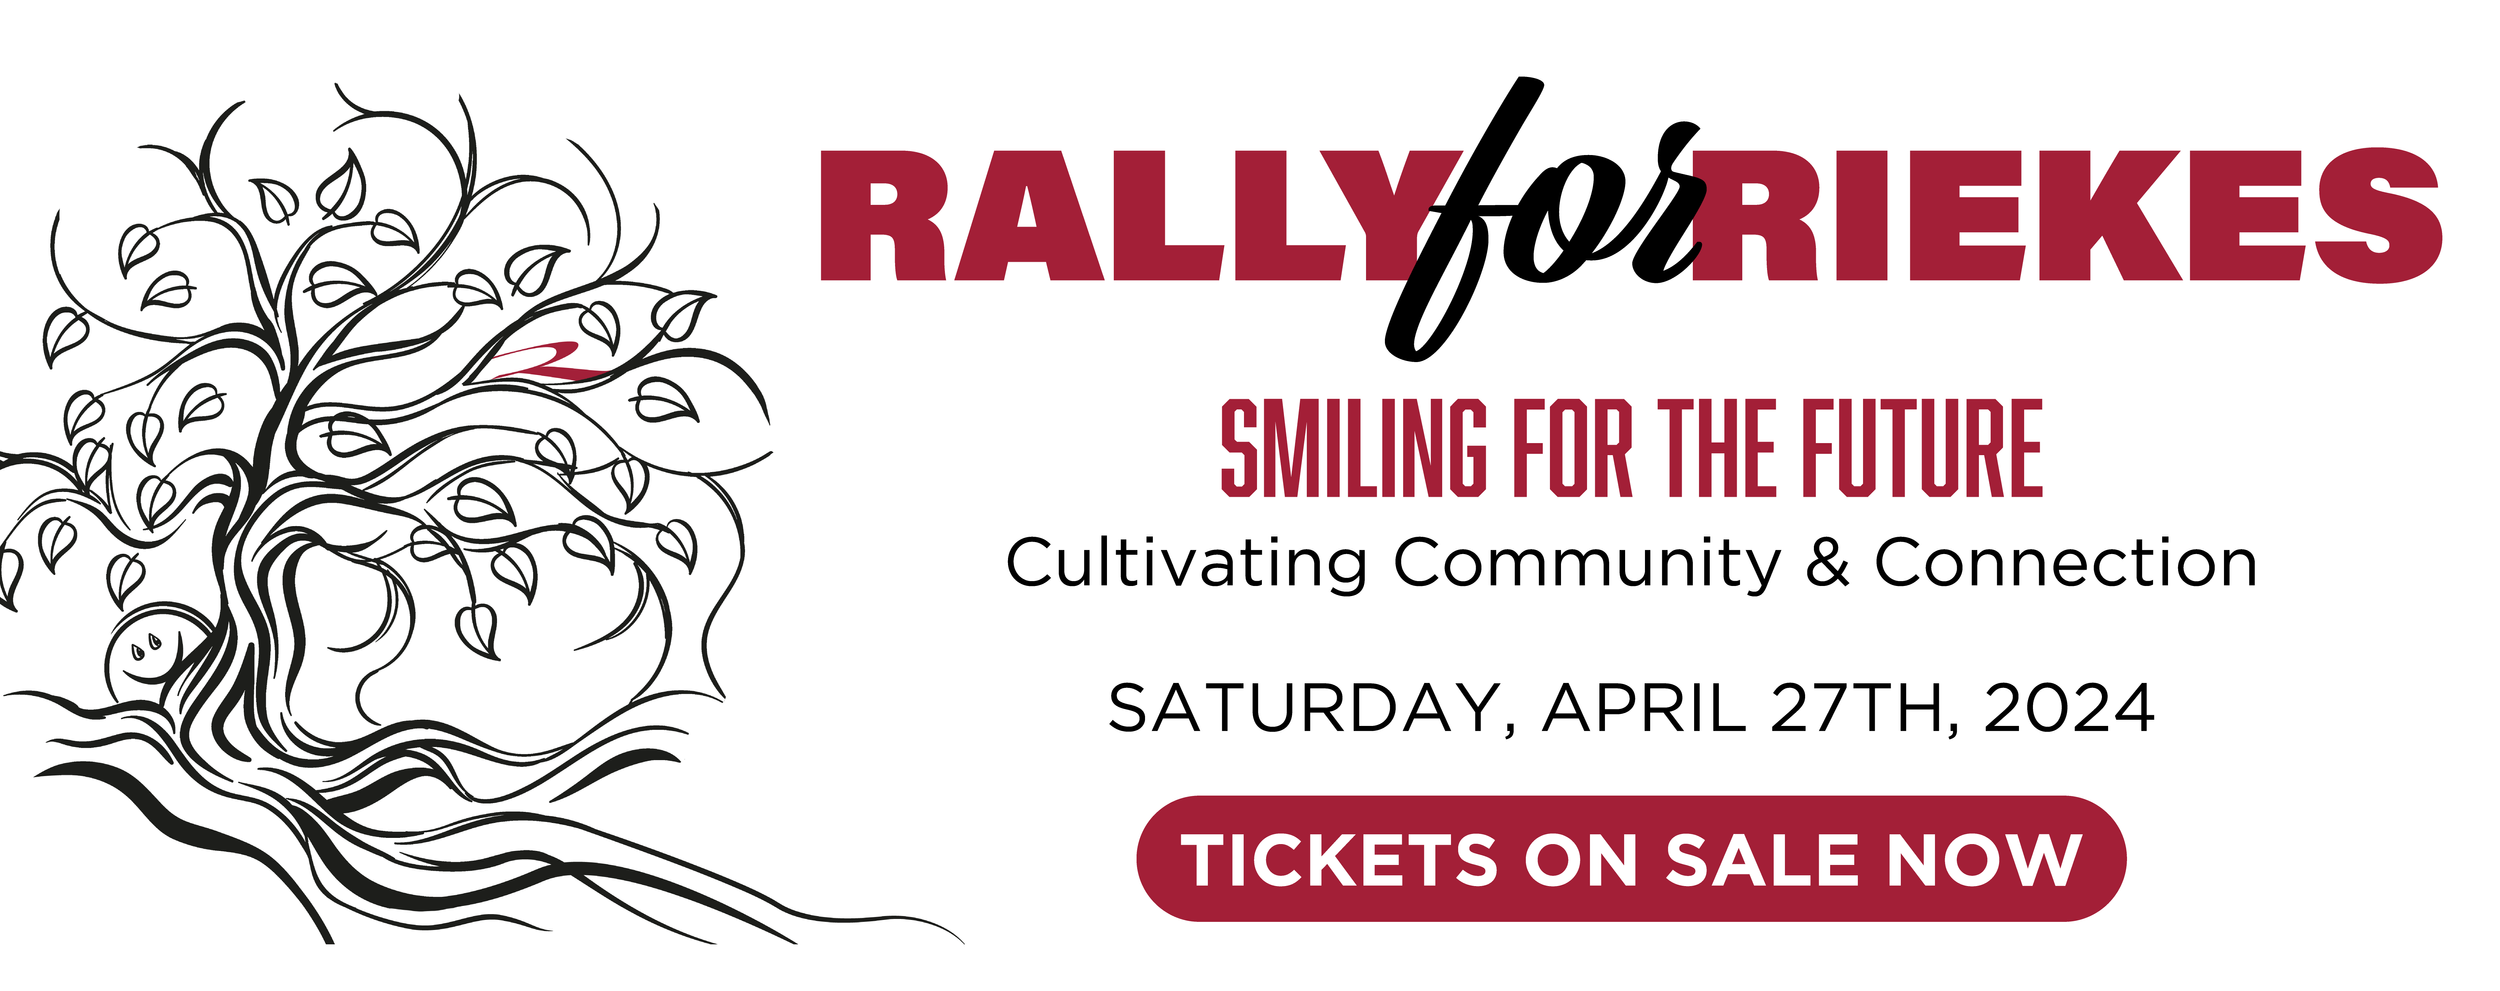 Rally for Riekes 2024 Tickets on Sale Now